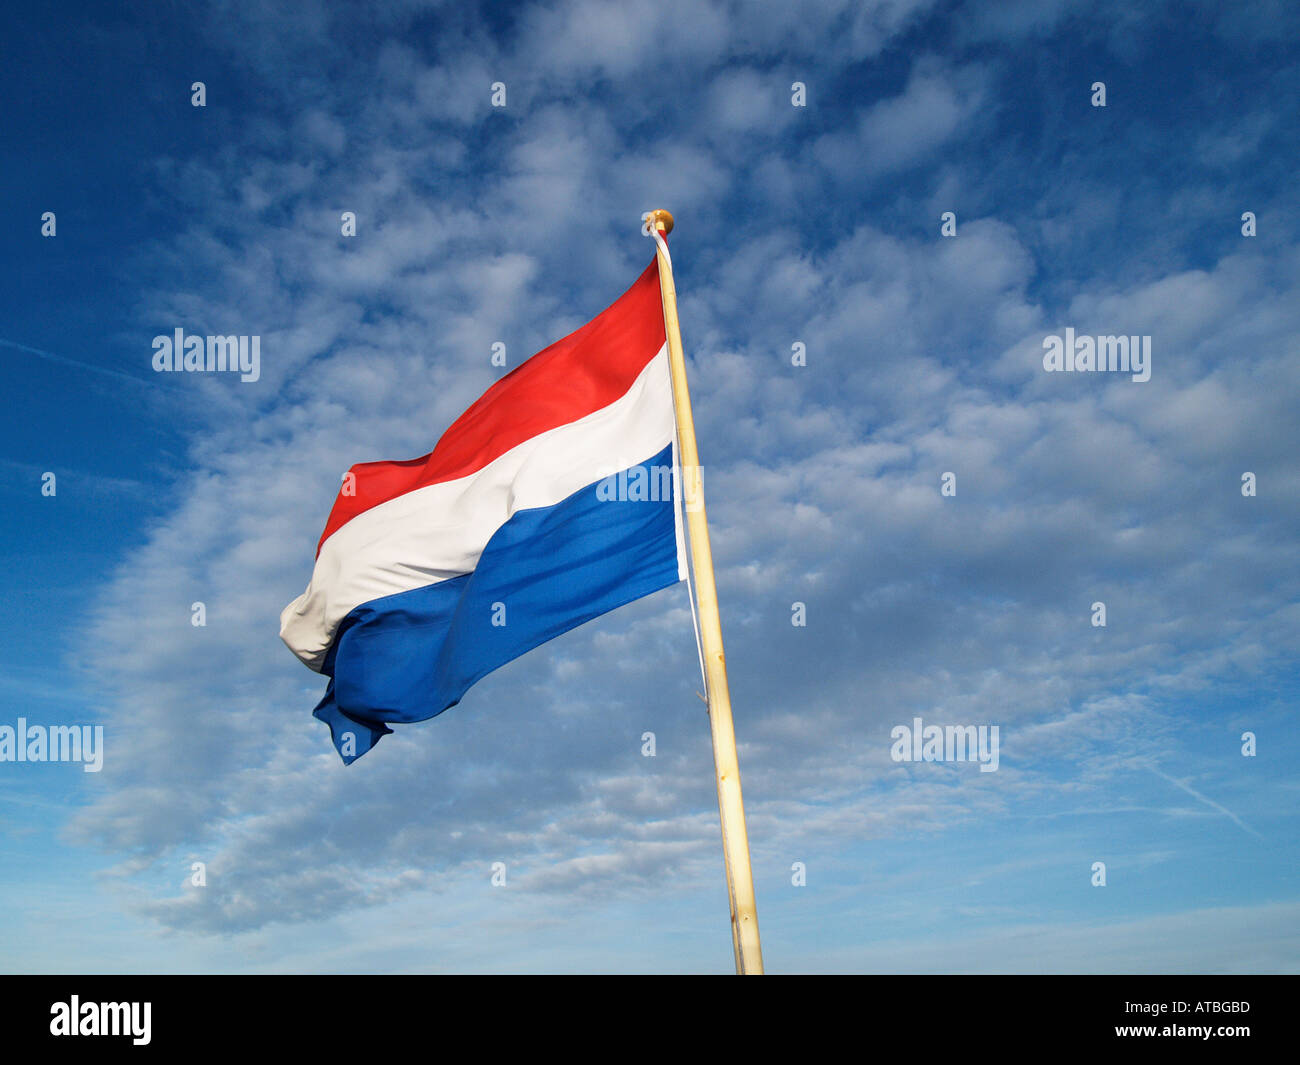 Dutch flag on a pole waving in the wind with blue sky and clouds as background Stock Photo